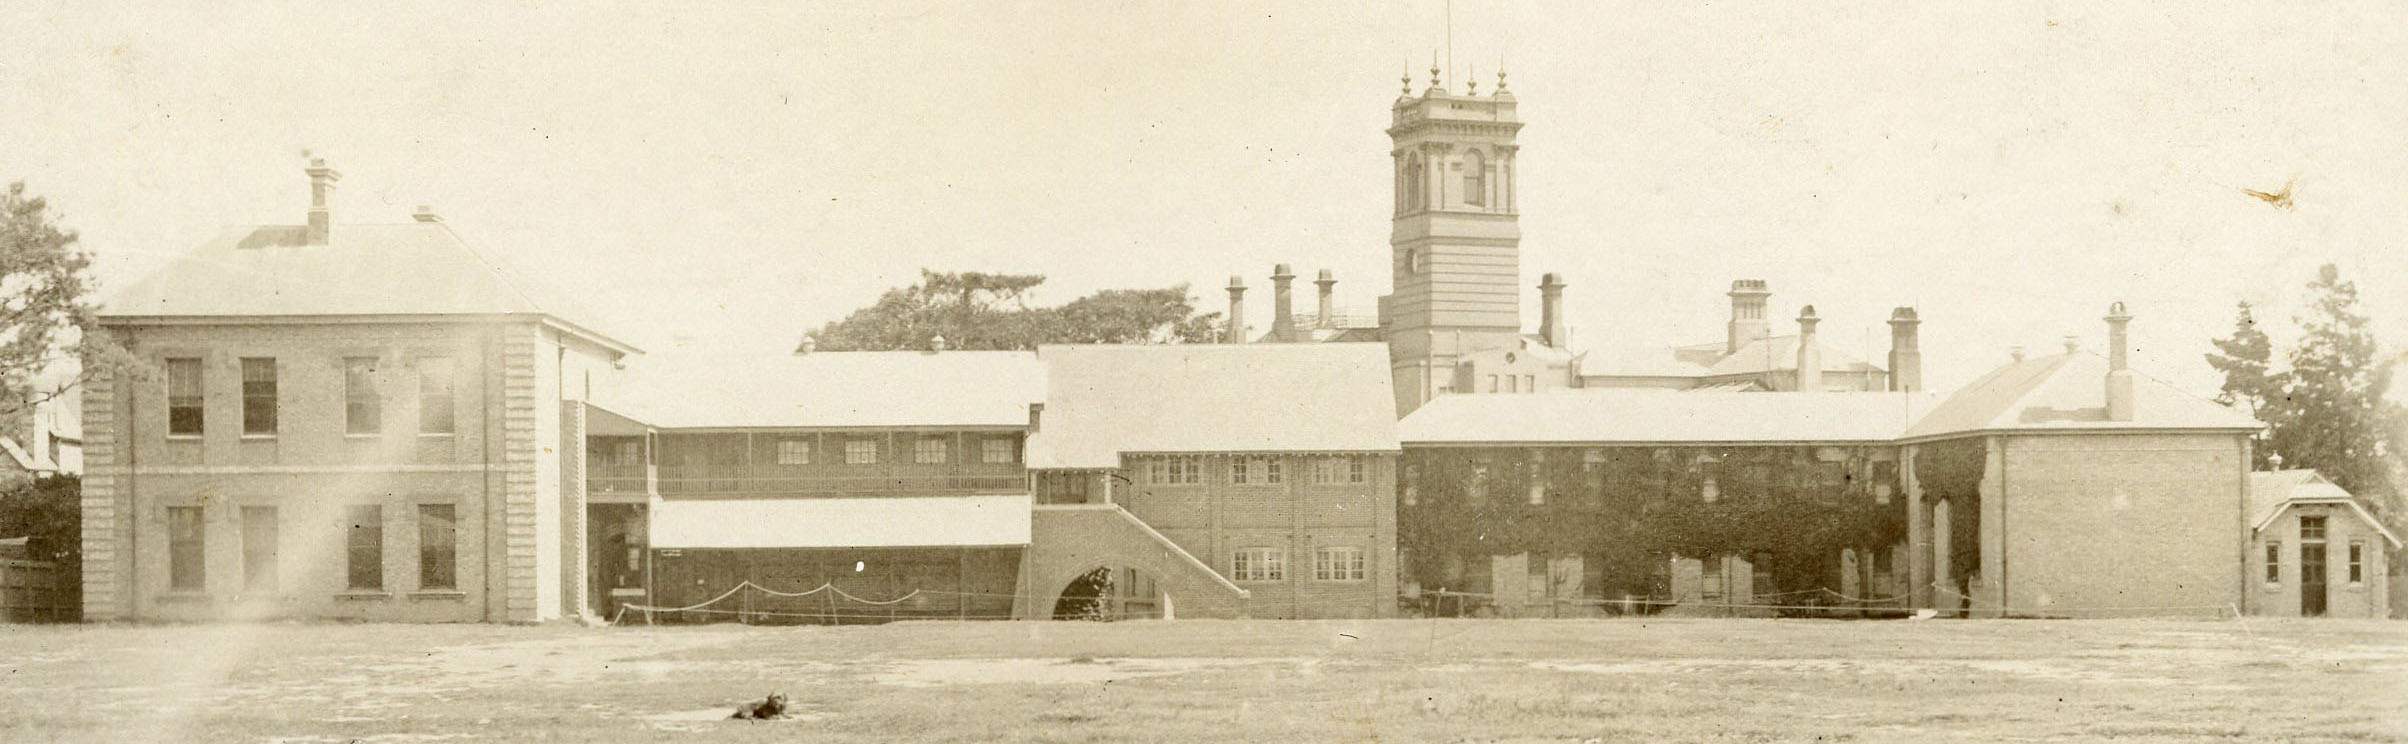 Banner photo - school buildings and oval 1910